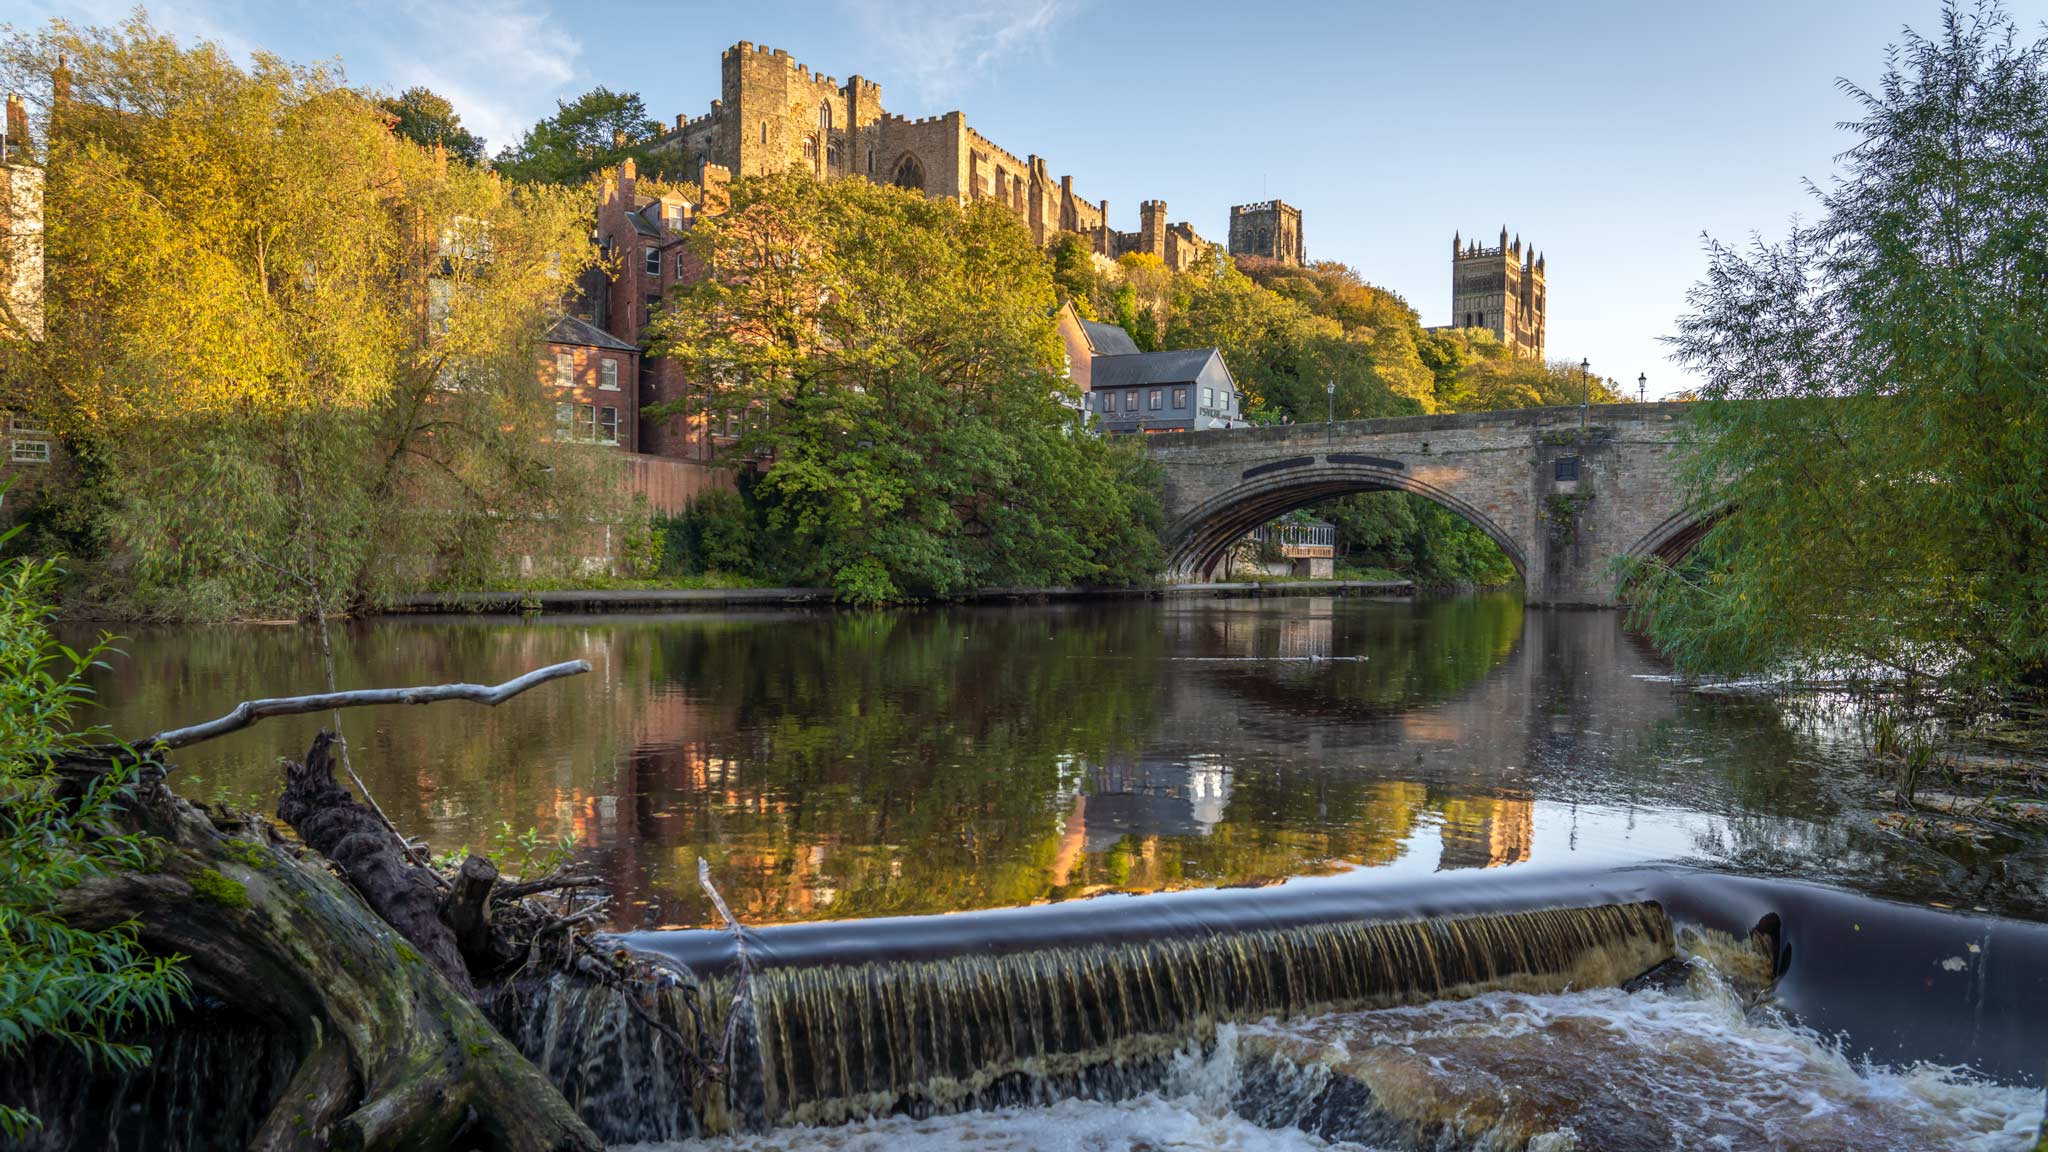 Durham Castle as seen from the riverside